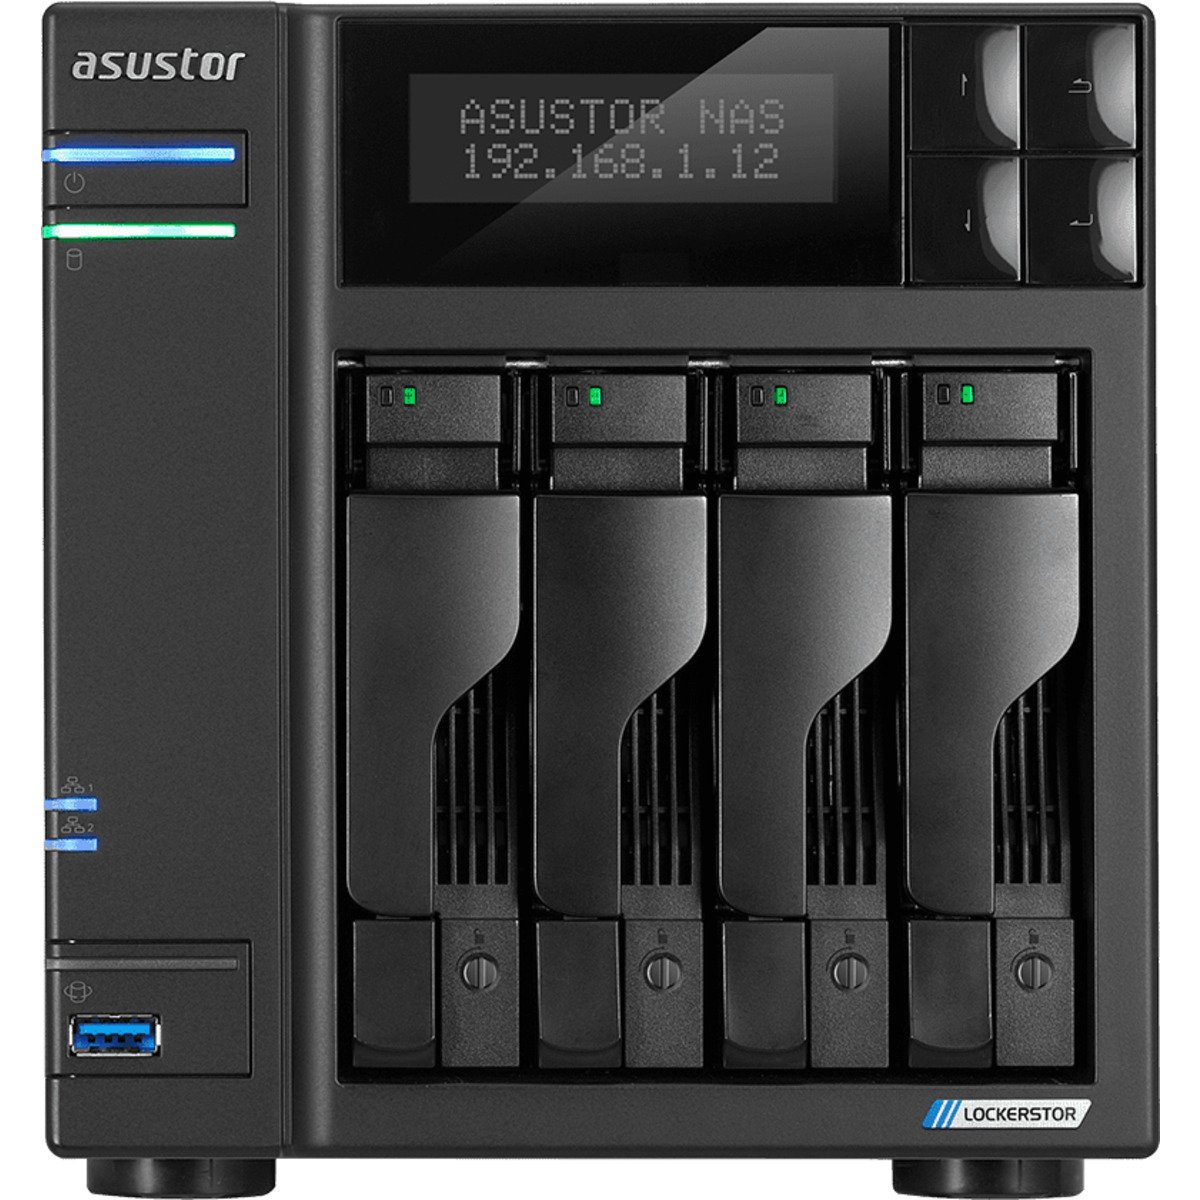 ASUSTOR AS6604T Lockerstor 4 24tb 4-Bay Desktop Multimedia / Power User / Business NAS - Network Attached Storage Device 4x6tb Western Digital Red Pro WD6003FFBX 3.5 7200rpm SATA 6Gb/s HDD NAS Class Drives Installed - Burn-In Tested - FREE RAM UPGRADE AS6604T Lockerstor 4